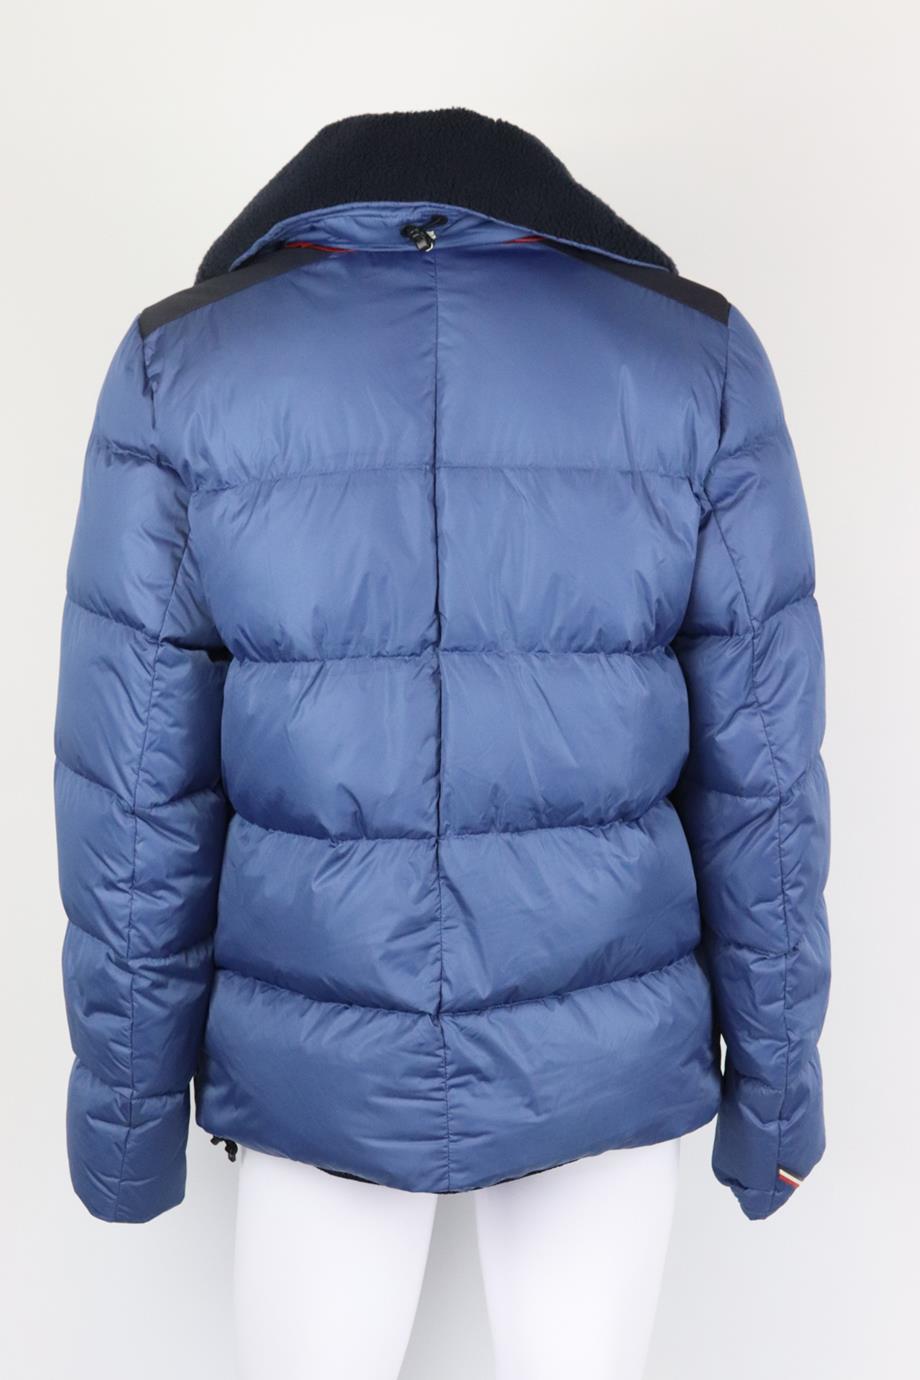 MONCLER GRENOBLE KOBUK SHEARLING TRIMMED QUILTED SHELL DOWN JACKET XXLARGE